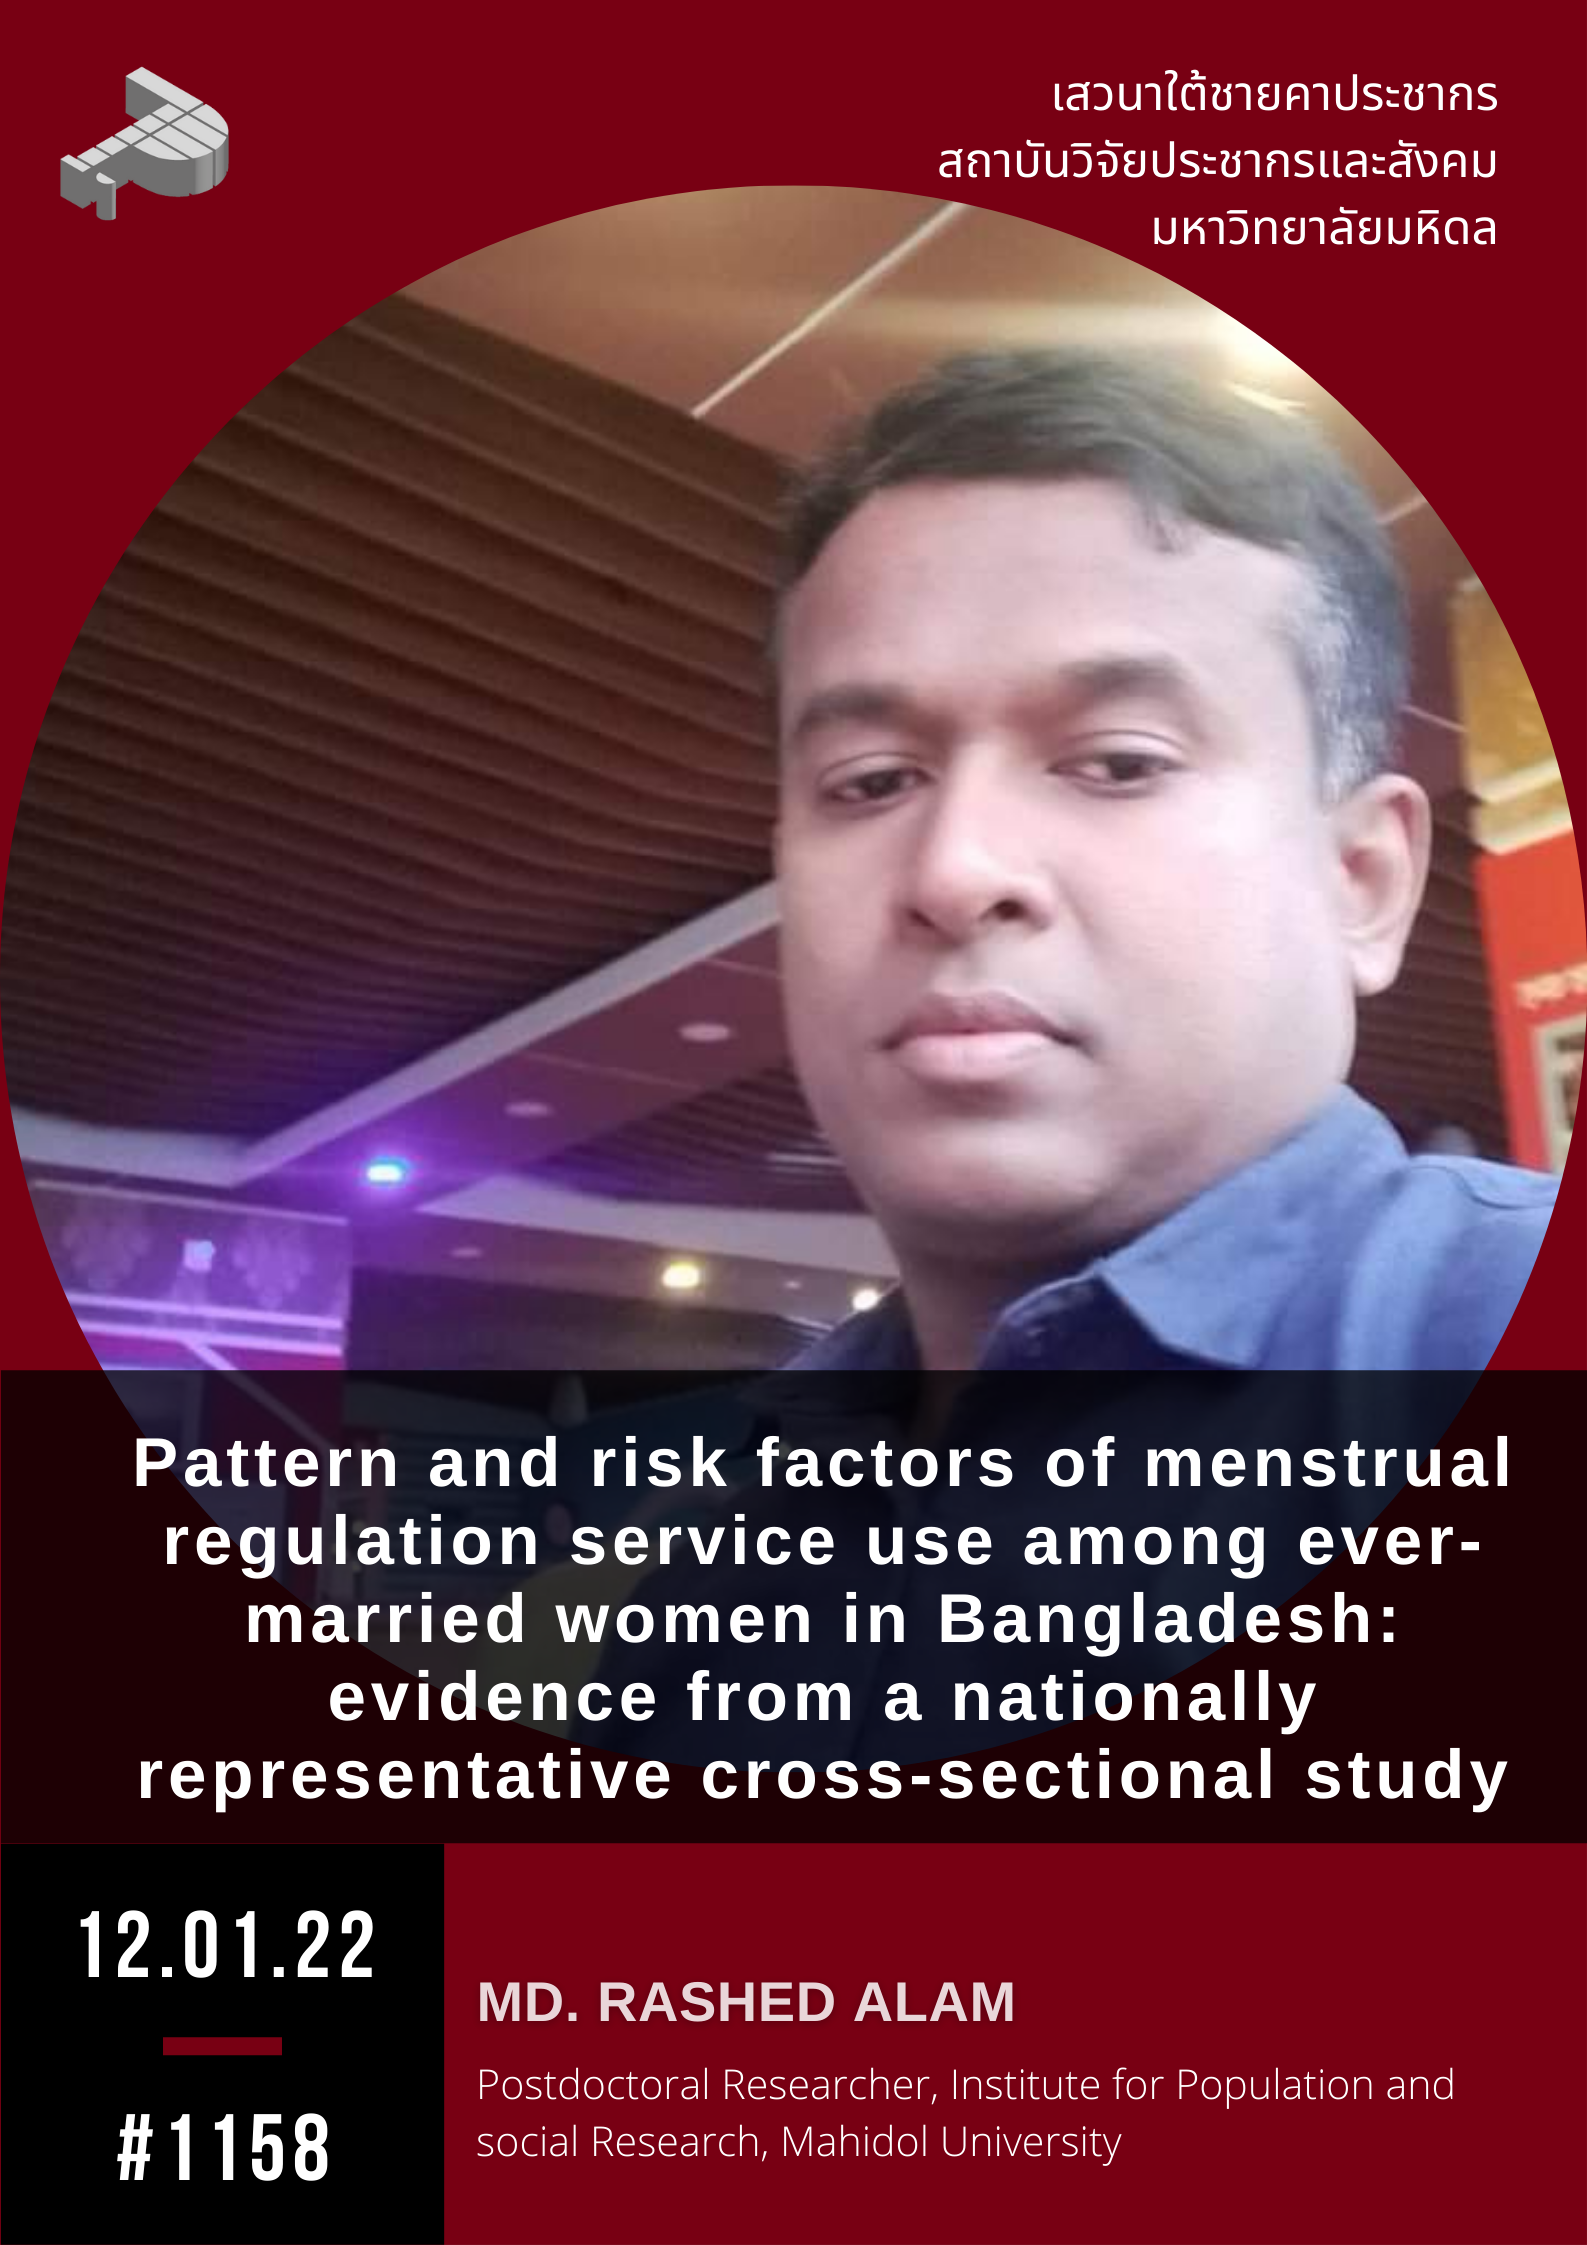 Pattern and risk factors of menstrual regulation service use among ever-married women in Bangladesh: evidence from a nationally representative cross-sectional study